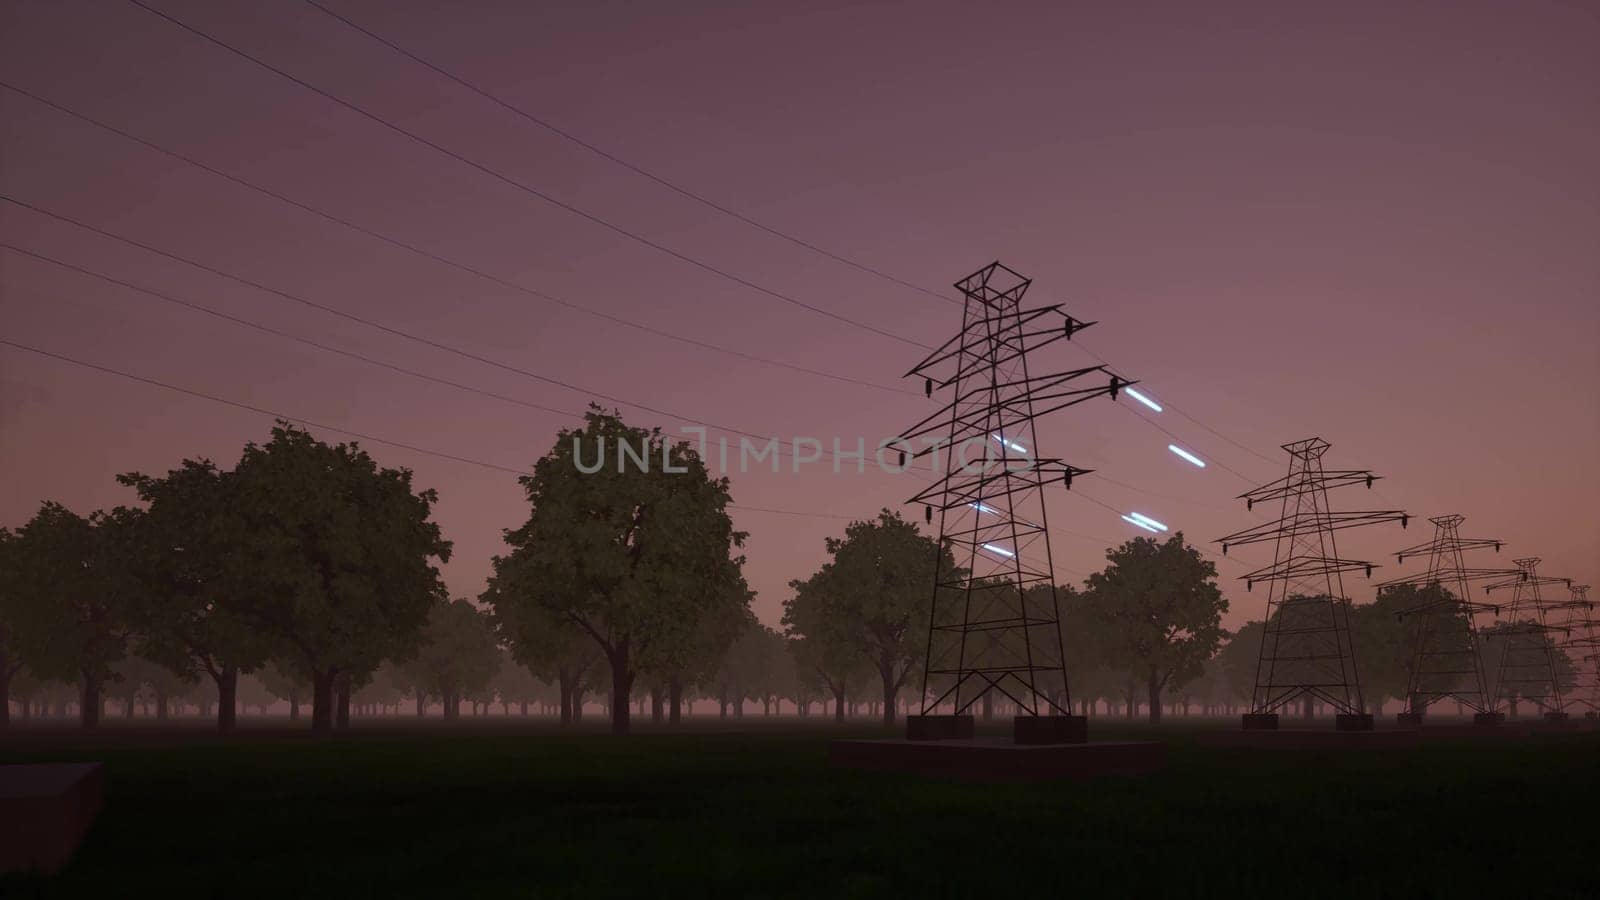 Electrical signal travels along power wires night landscape 3d render by Zozulinskyi